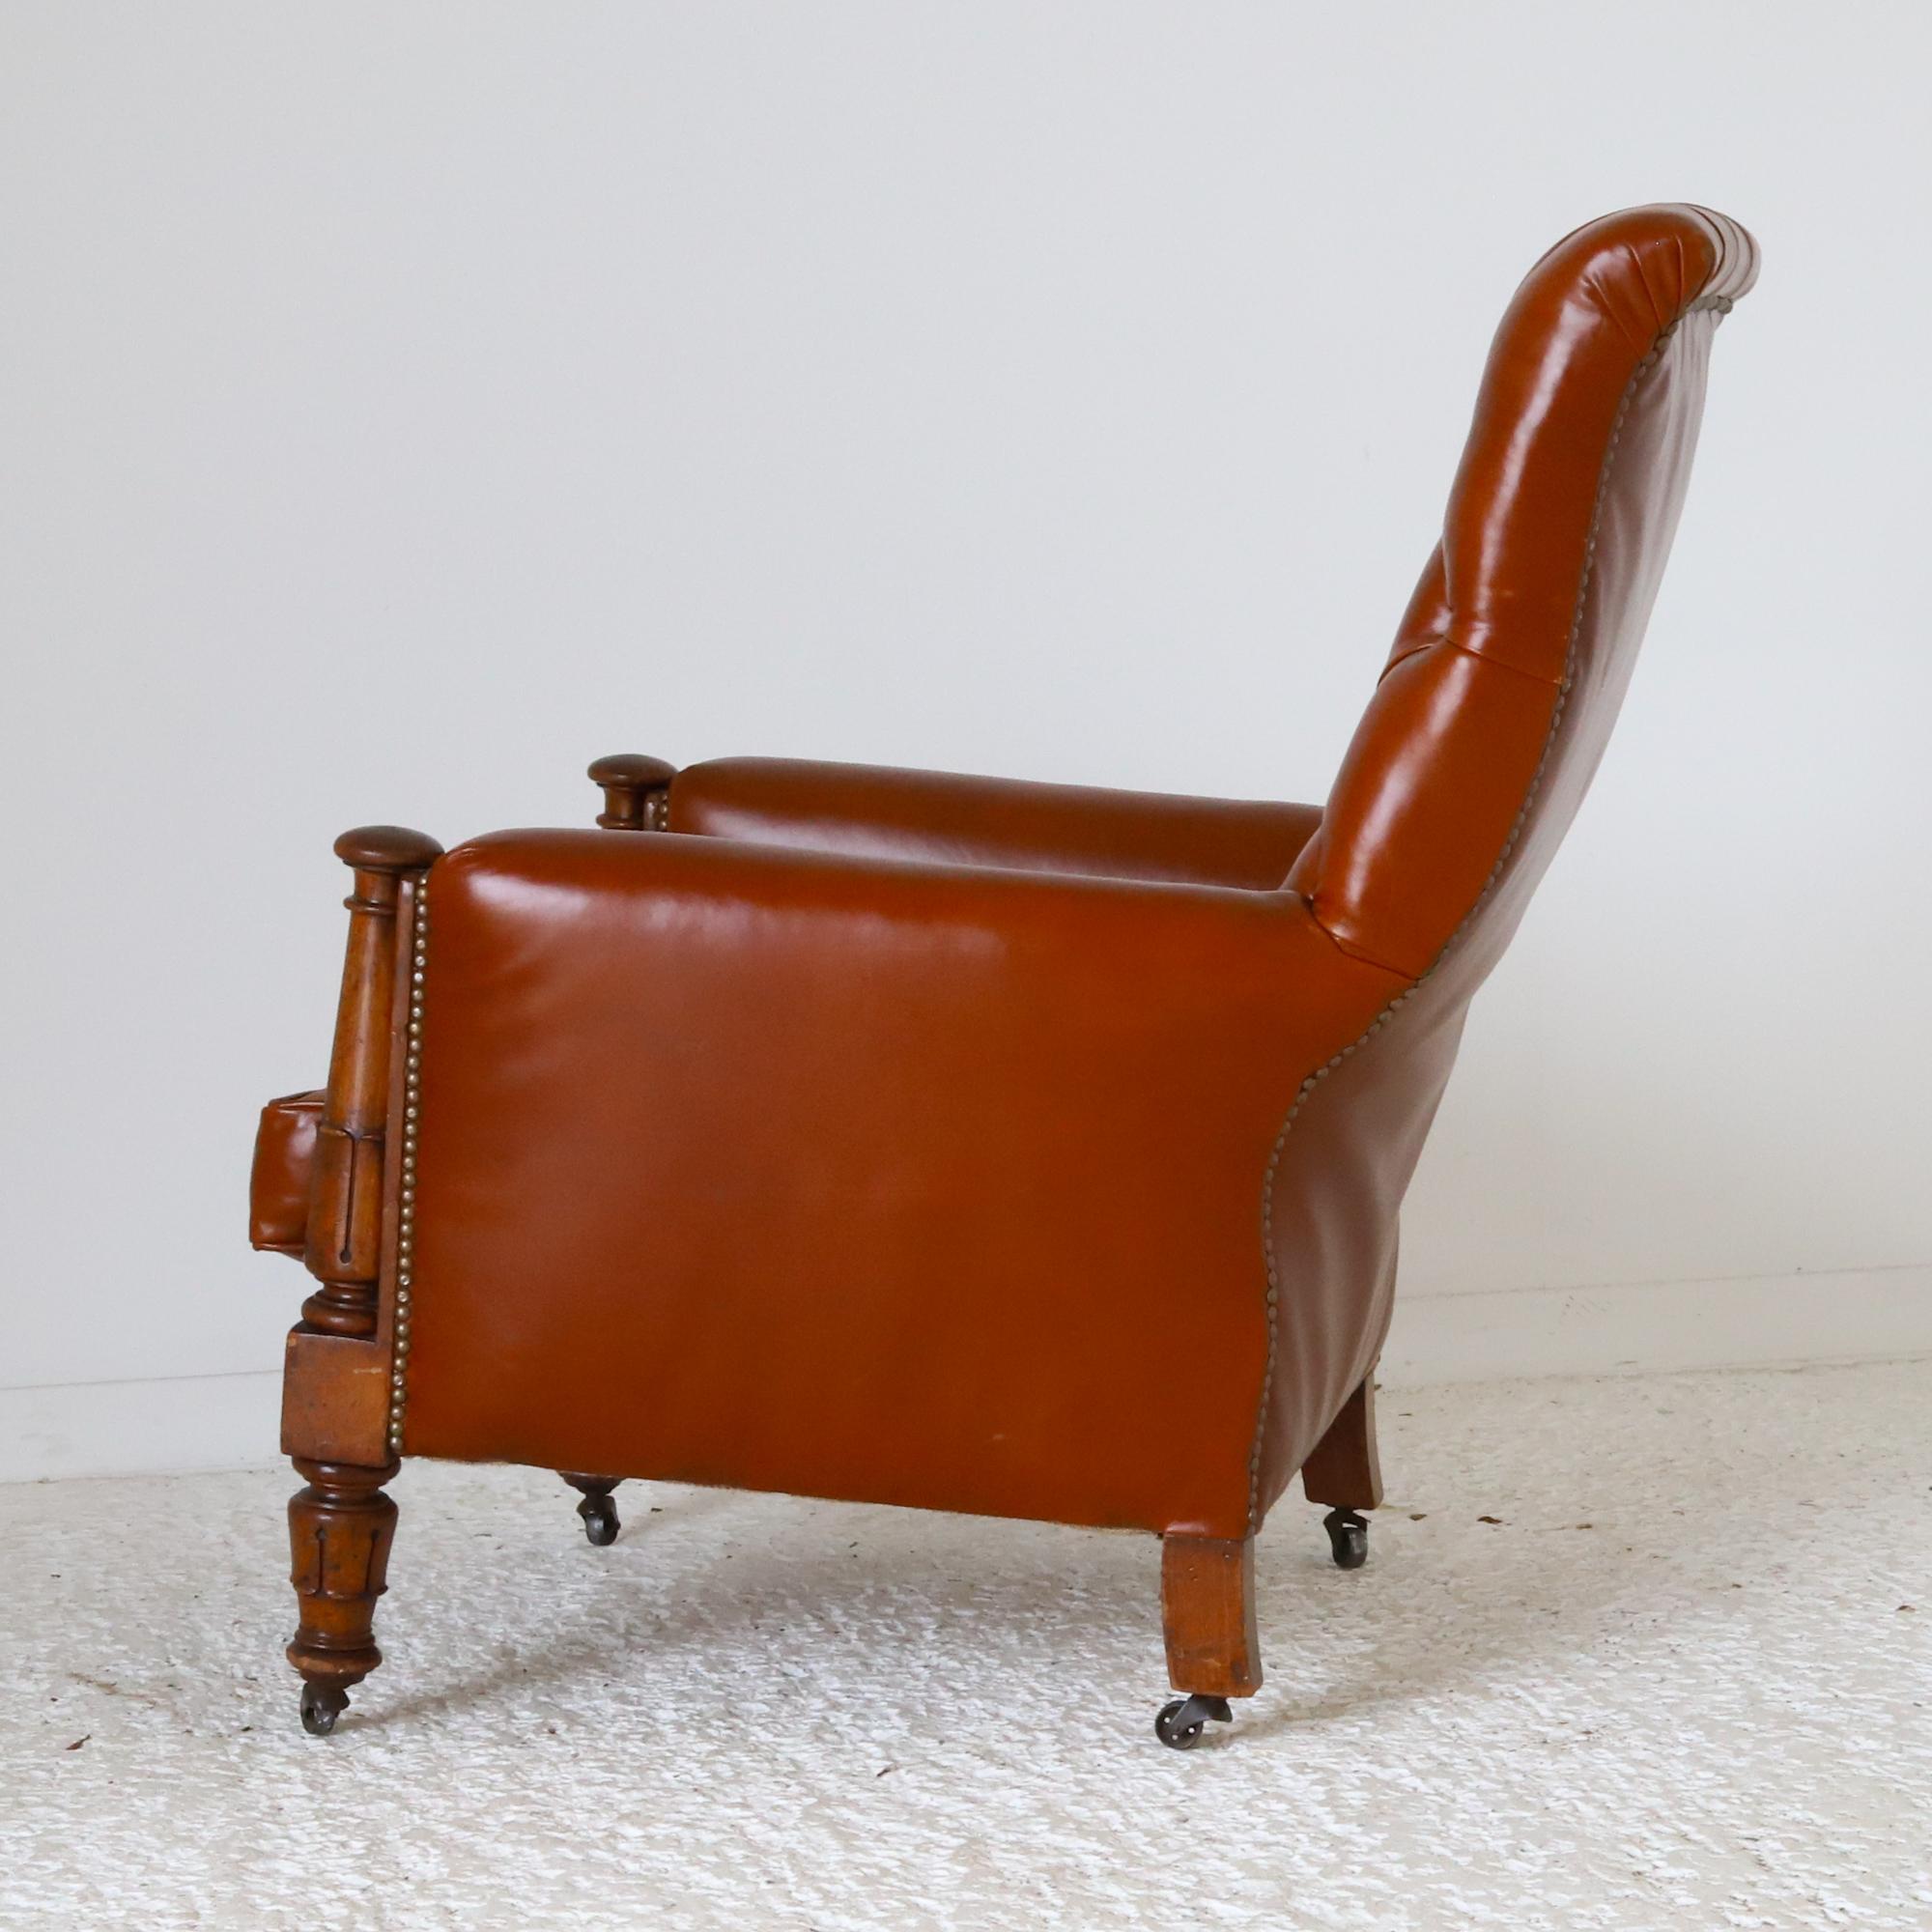 English c. 1830 Mahogany William IV Library Chair reupholstered in tan leather  For Sale 7